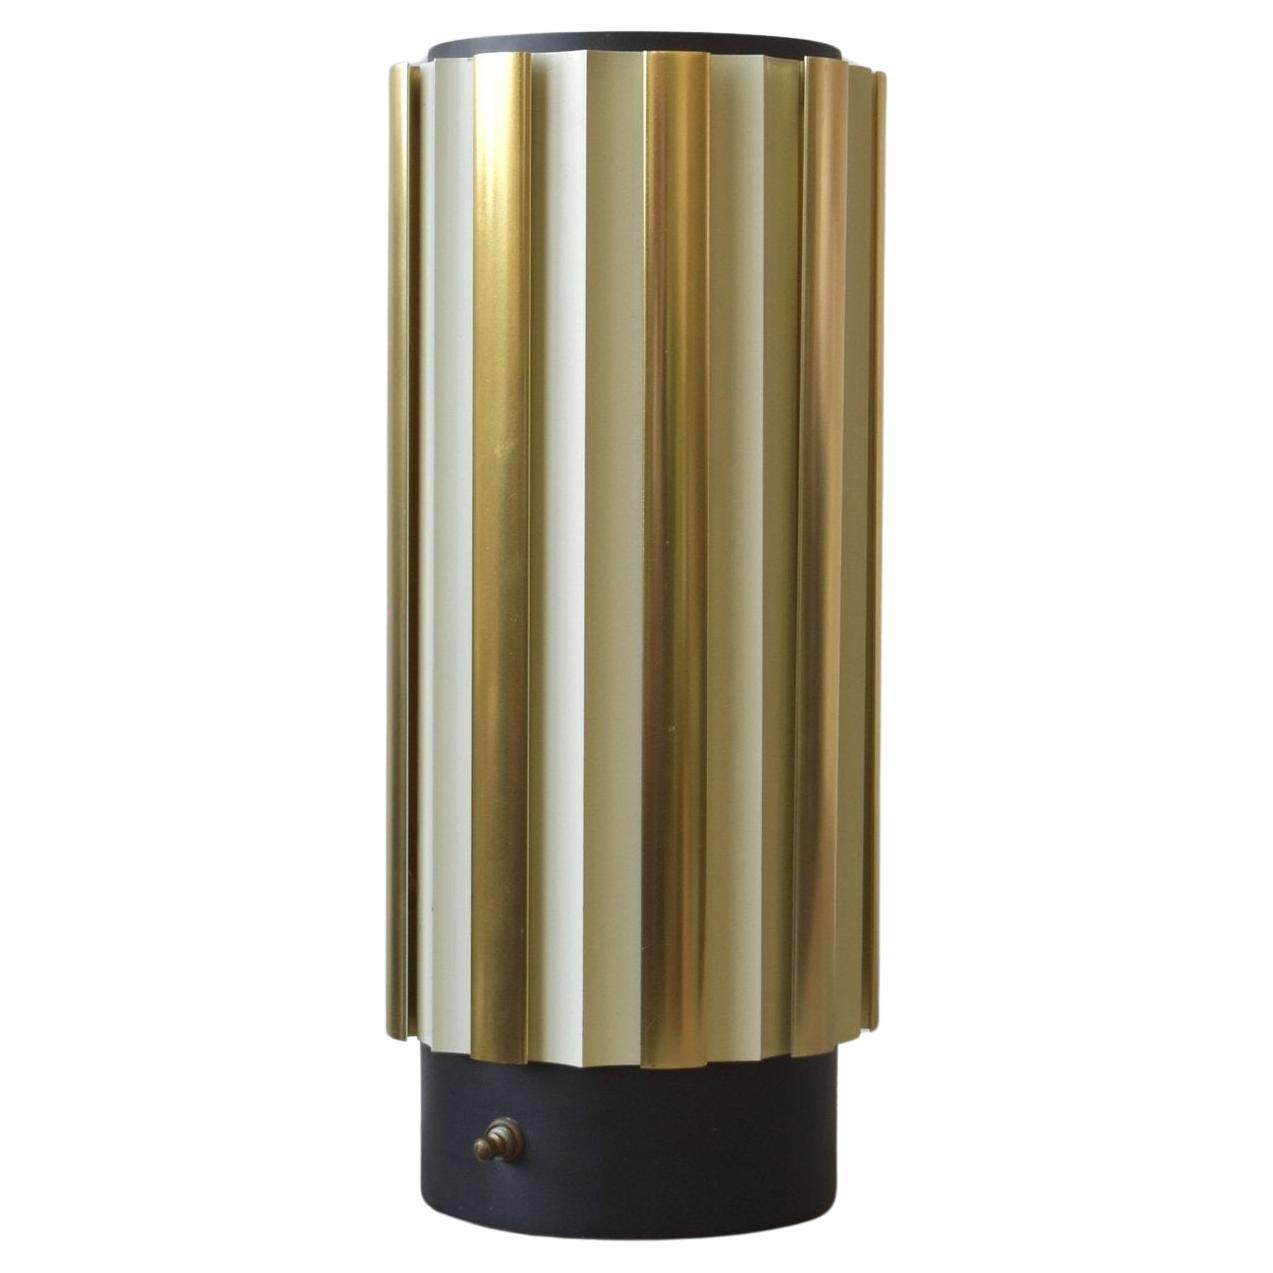 Vintage Louvered Metal Lamp Attributed to Gerald Thurston for Lightolier, 1960s For Sale